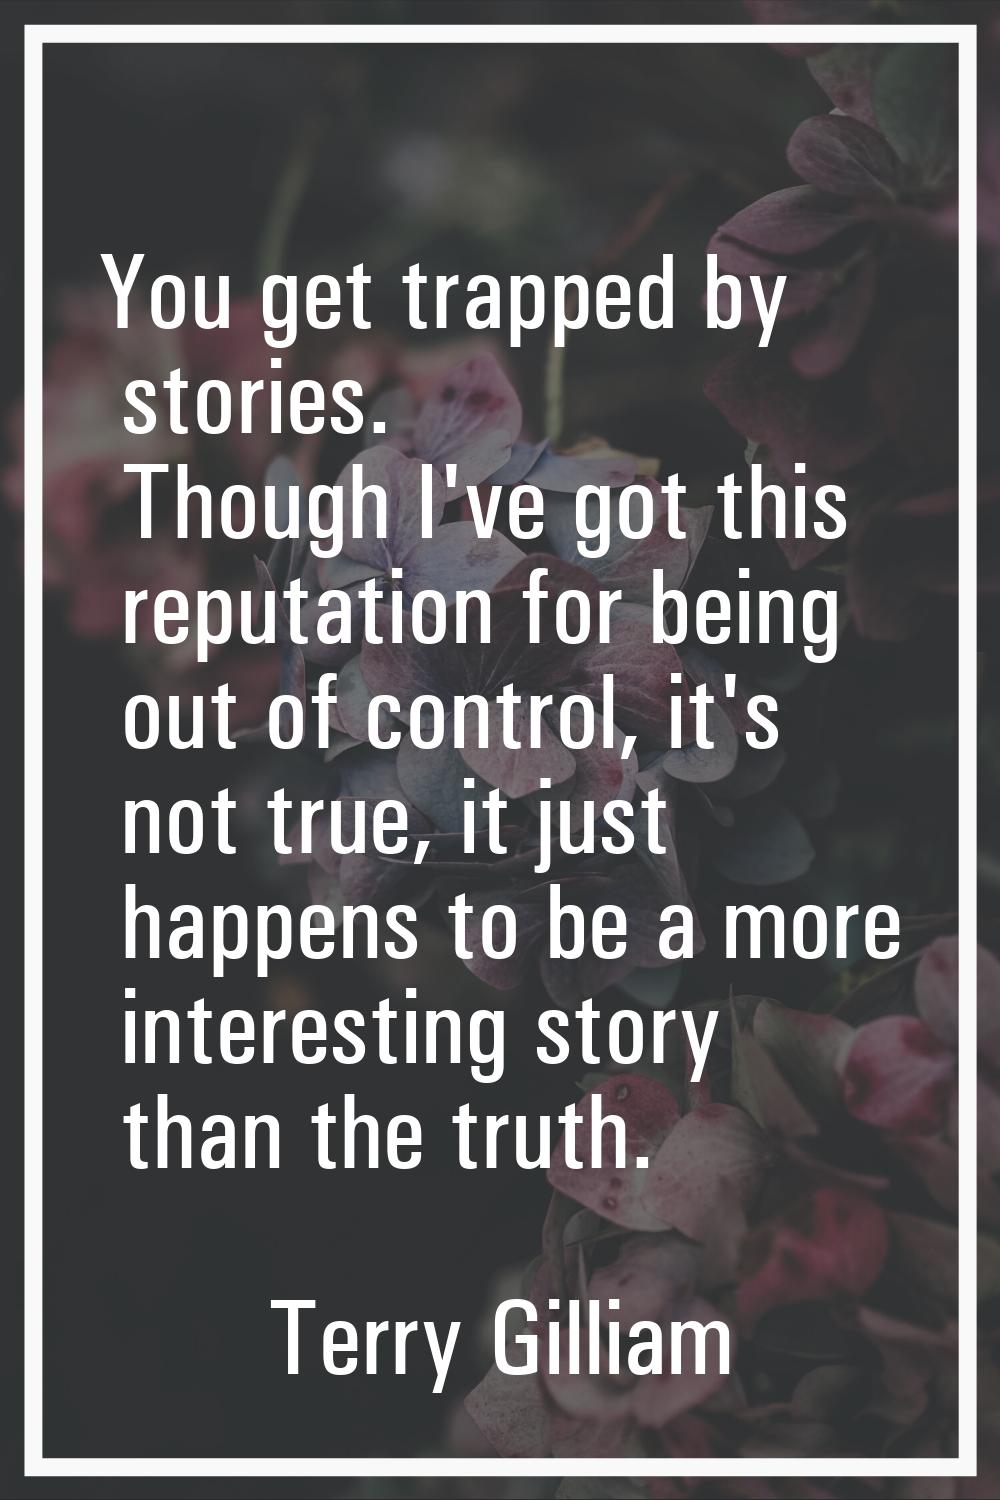 You get trapped by stories. Though I've got this reputation for being out of control, it's not true